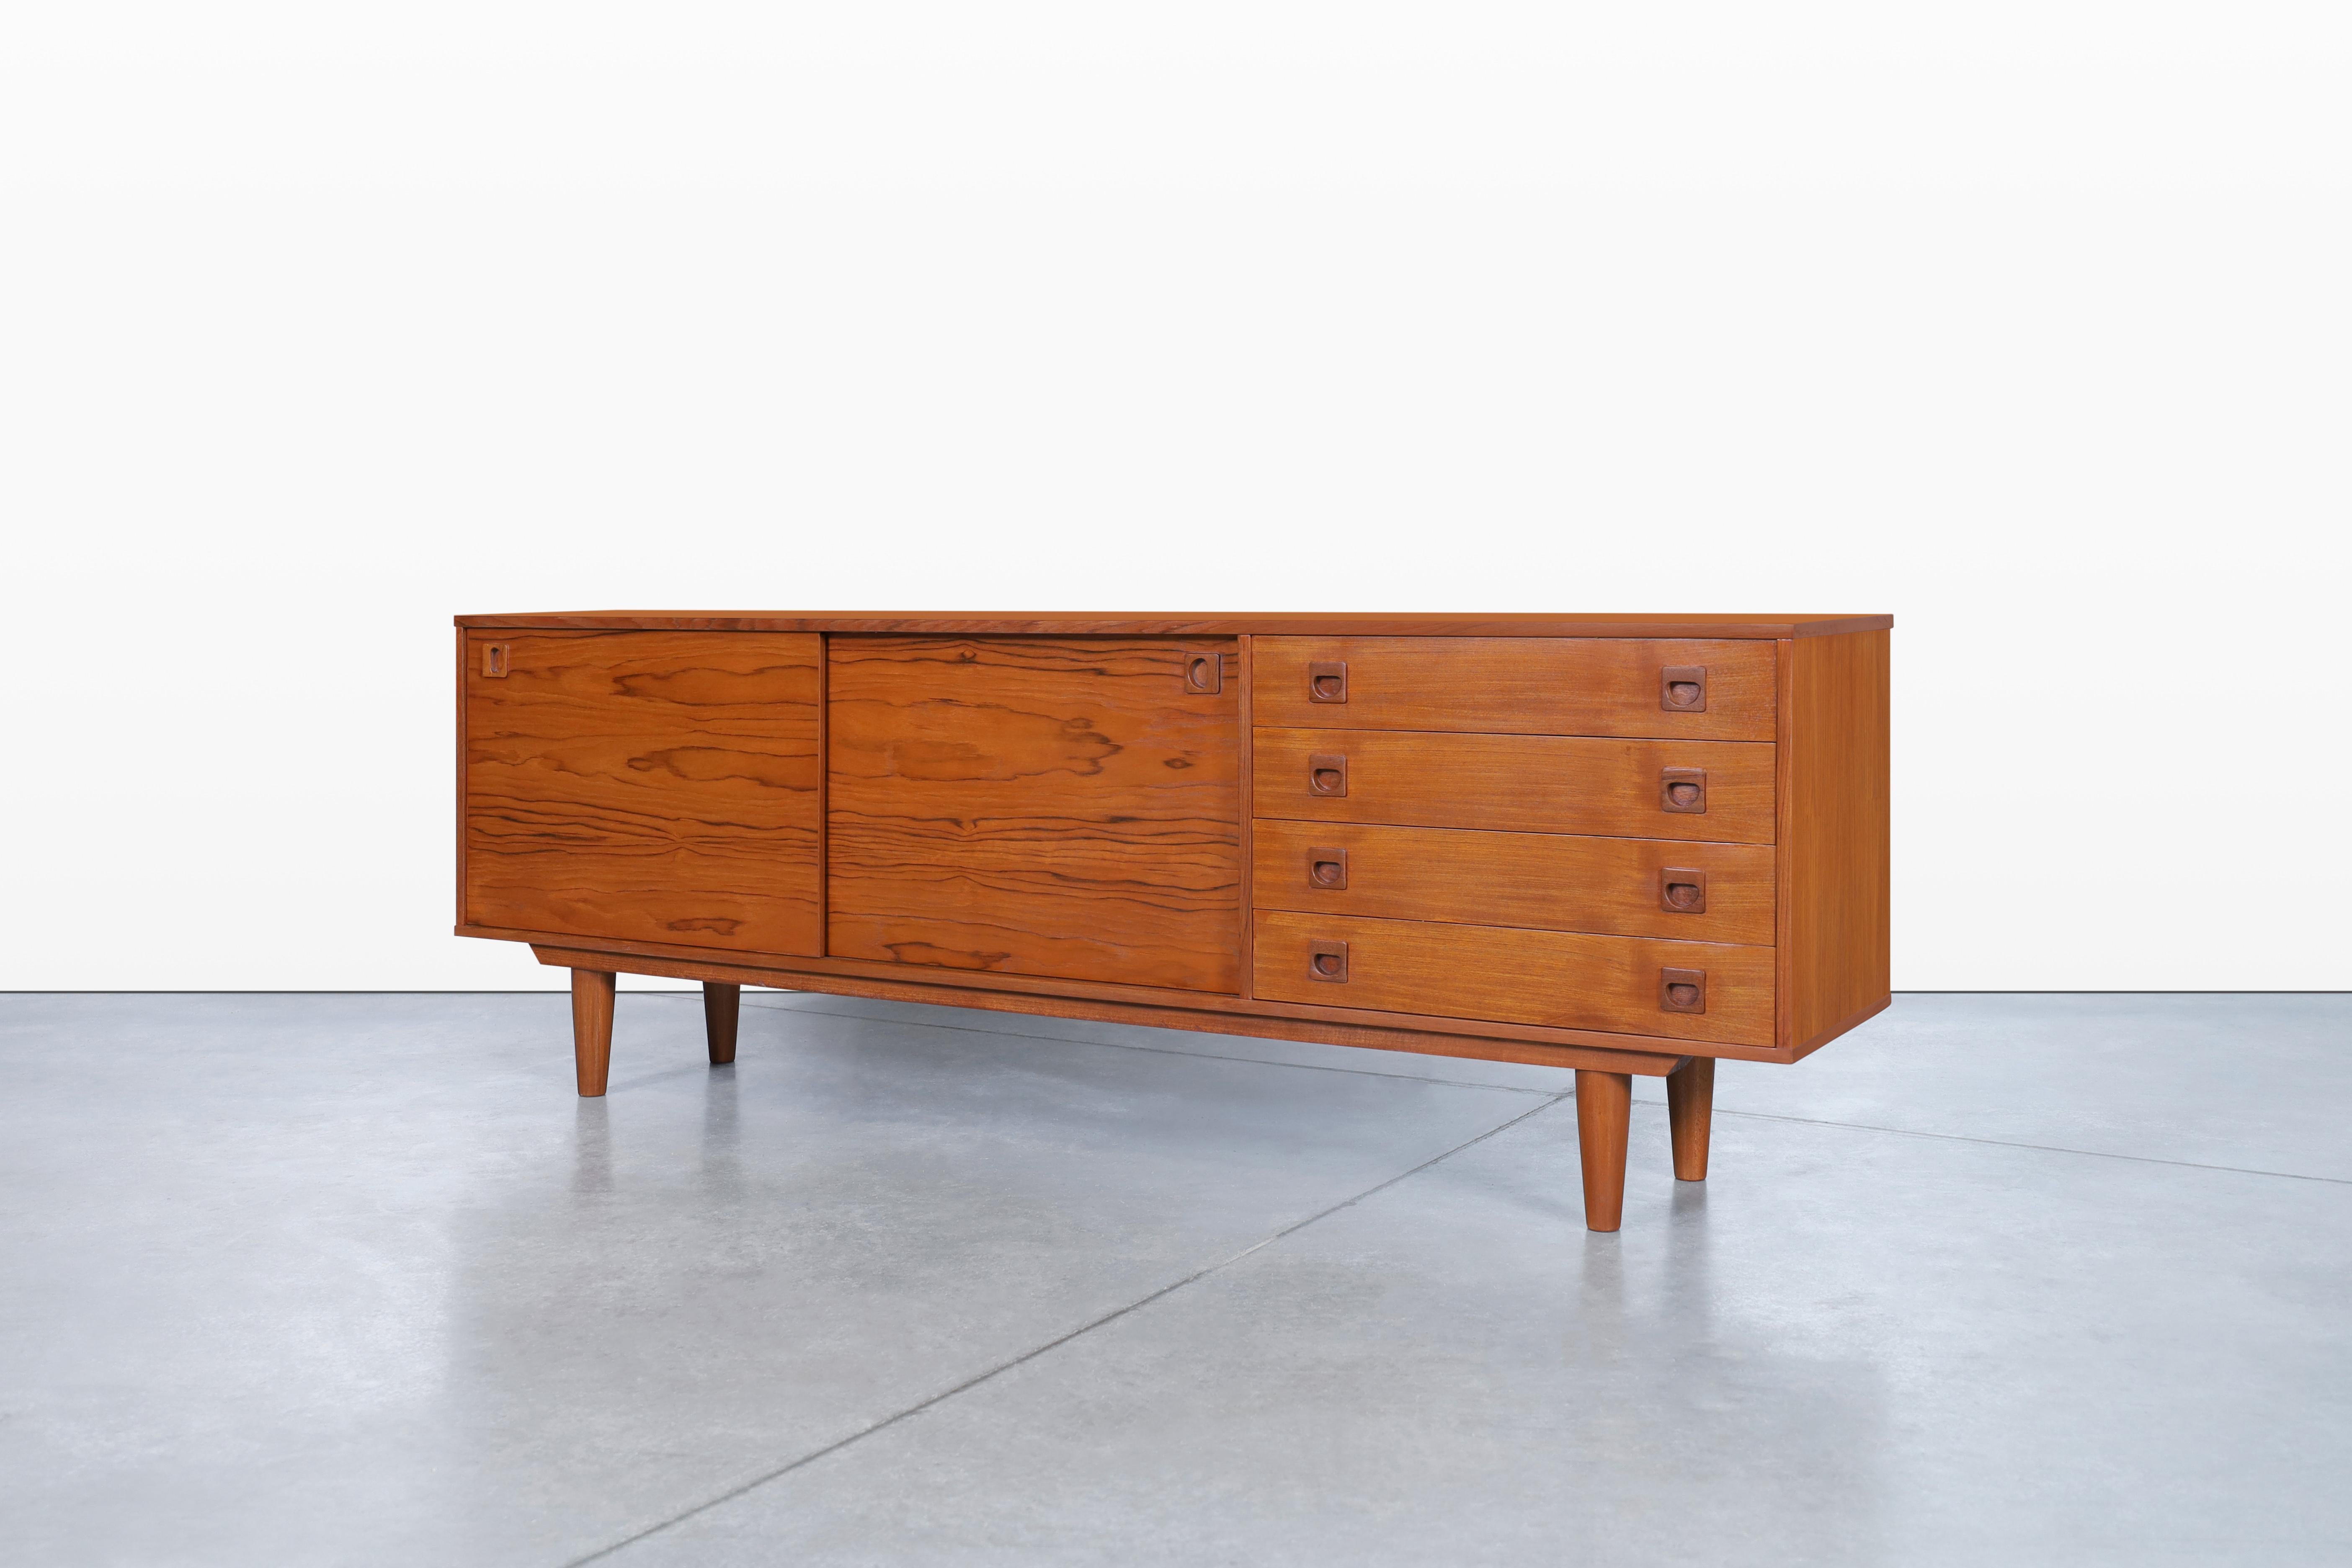 Exceptional Danish modern teak credenza designed and manufactured in Denmark circa 1960s. This credenza has a representative design of the area where it was built, where its versatility and functionality stand out. This credenza has been constructed